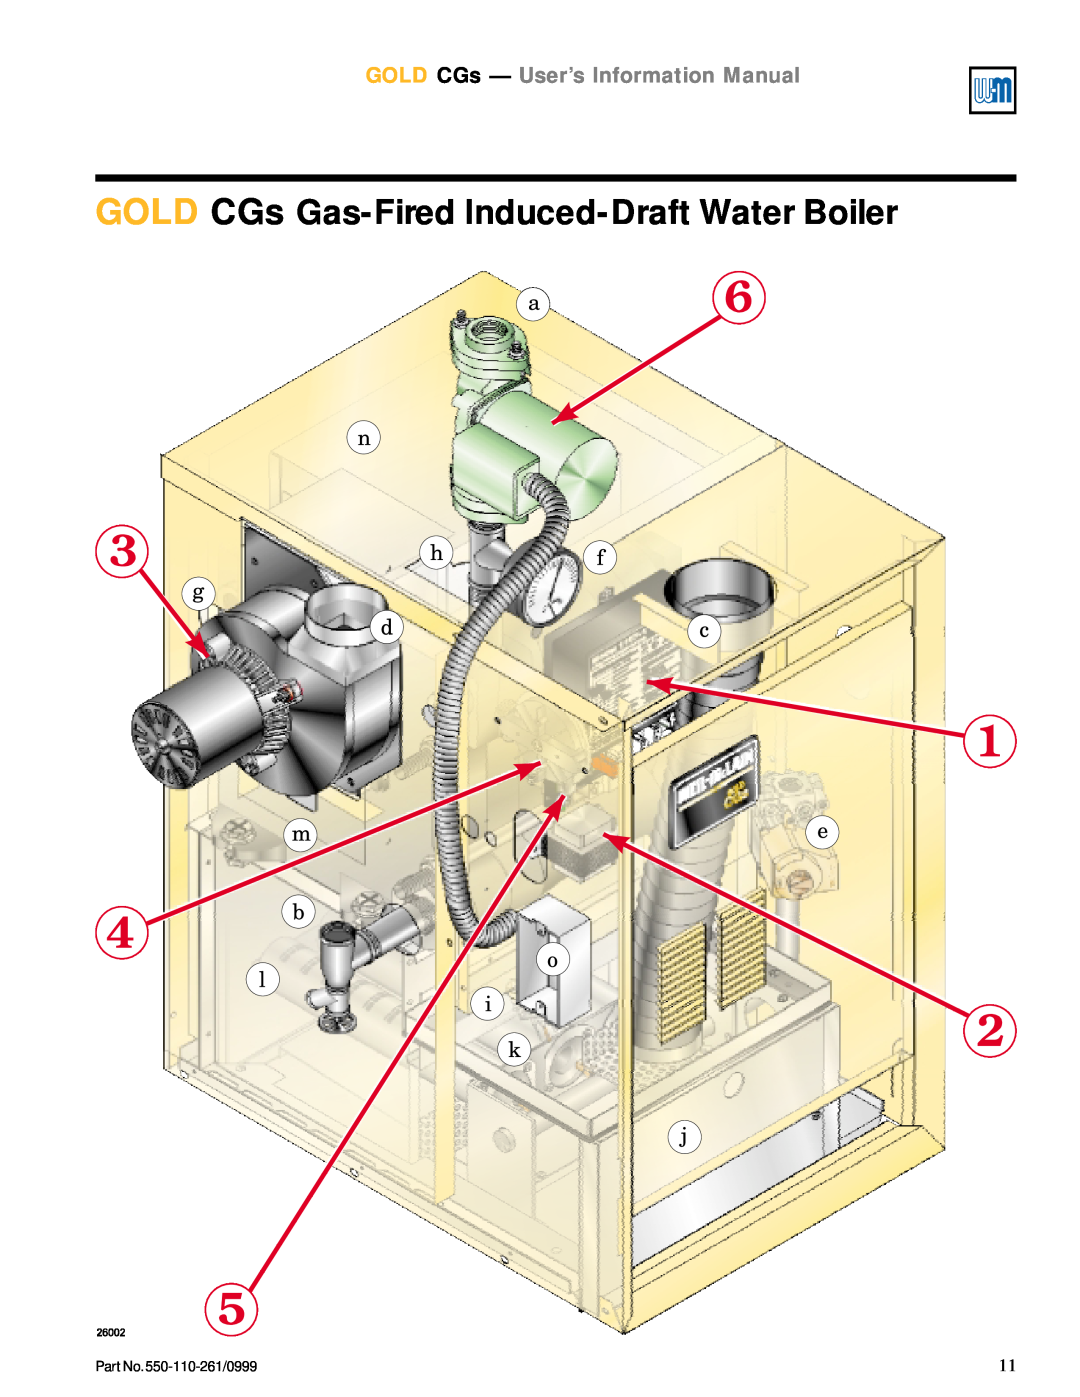 Weil-McLain manual GOLD CGs Gas-Fired Induced-DraftWater Boiler, GOLD CGs - User’s Information Manual 